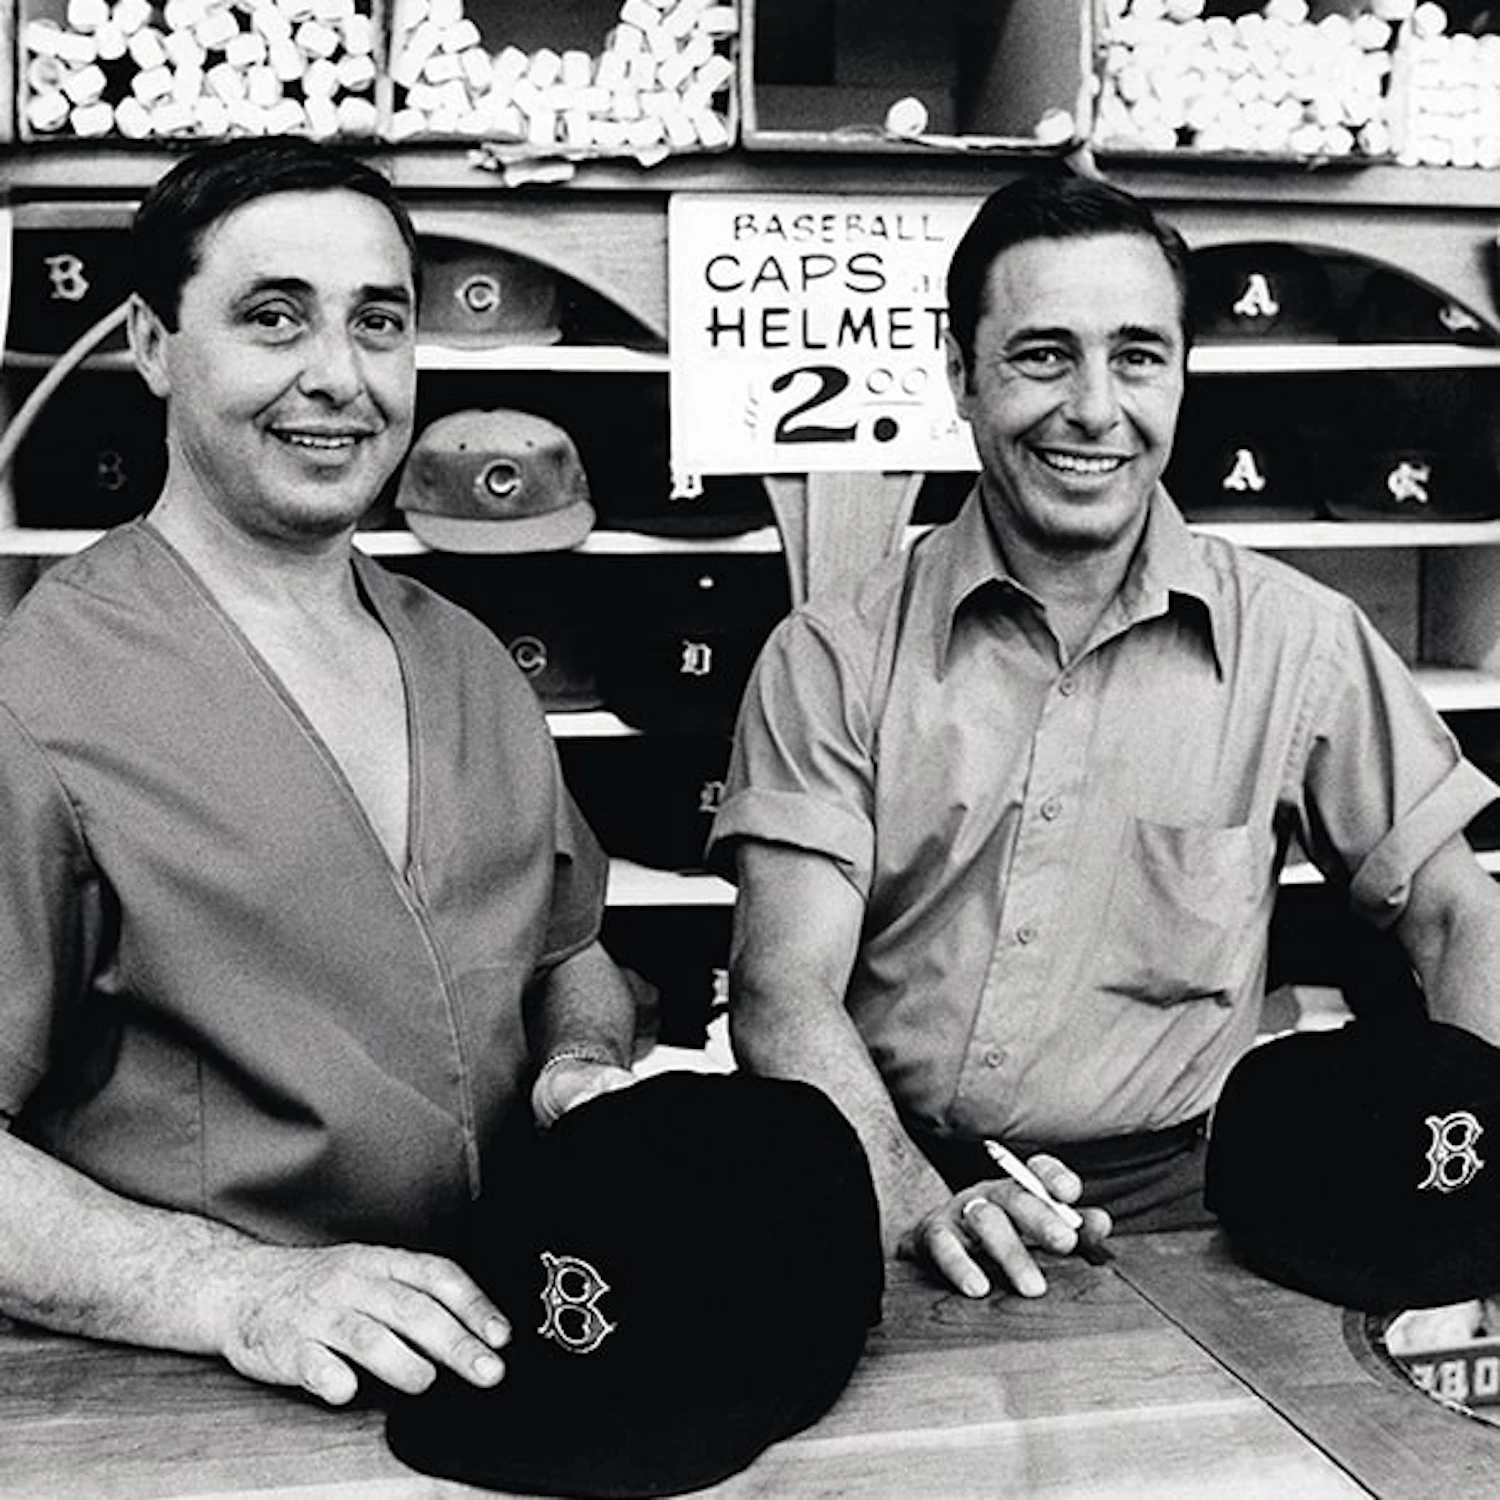 Why is the Cap Brand ’47, which has Grown from Wagon Sales to Officially Licensed by MLB, so Popular?